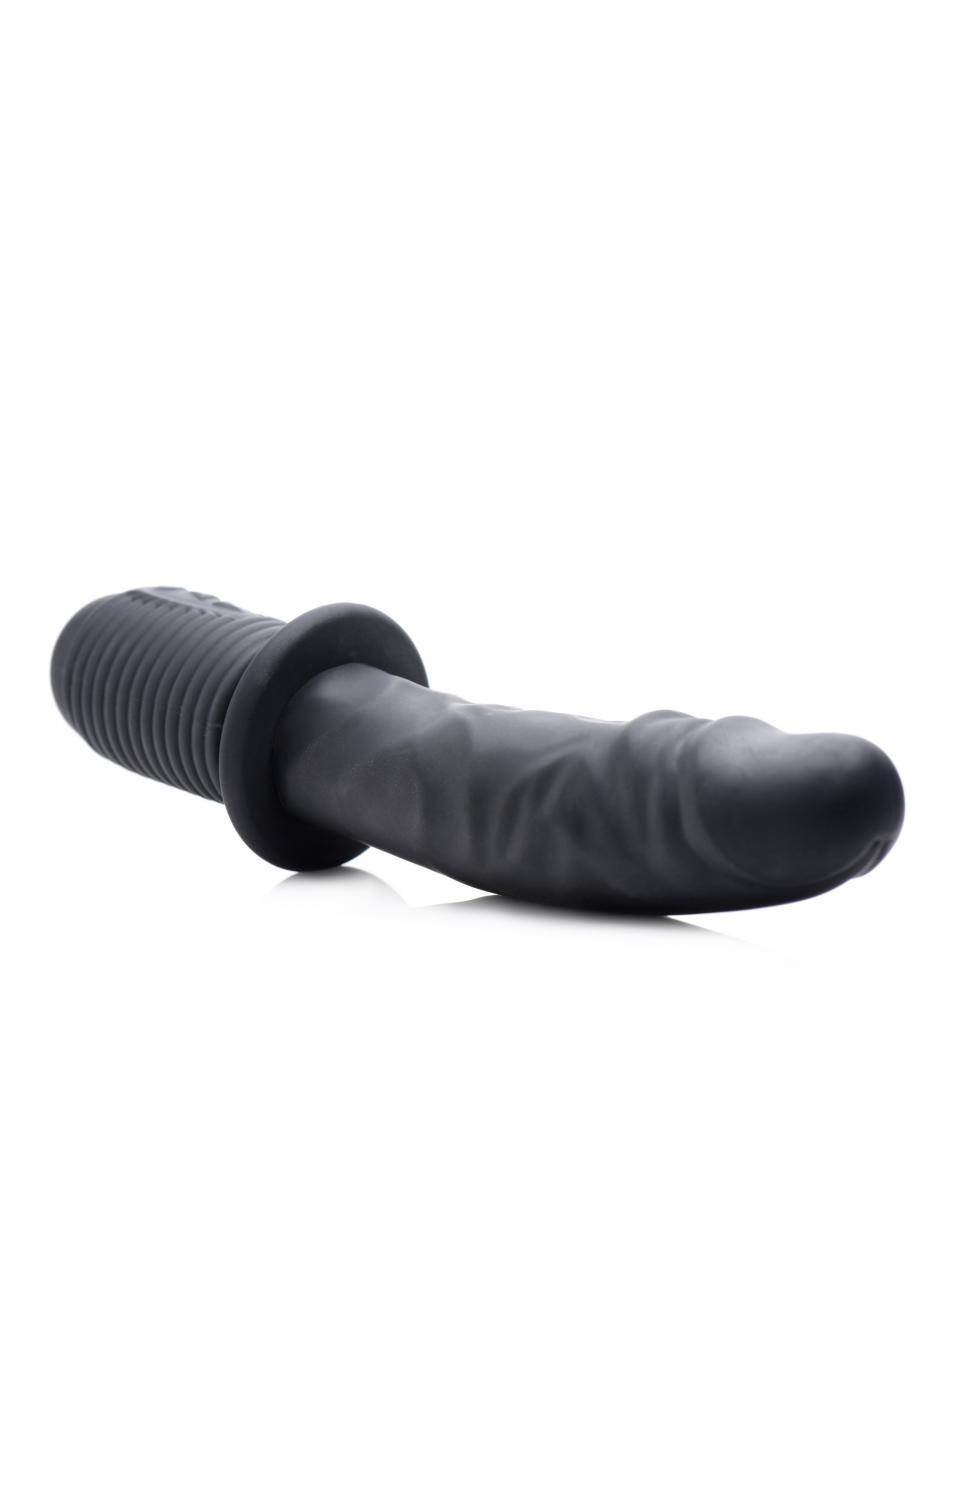 Power Pounder Vibrating and Thrusting Silicone Dildo.